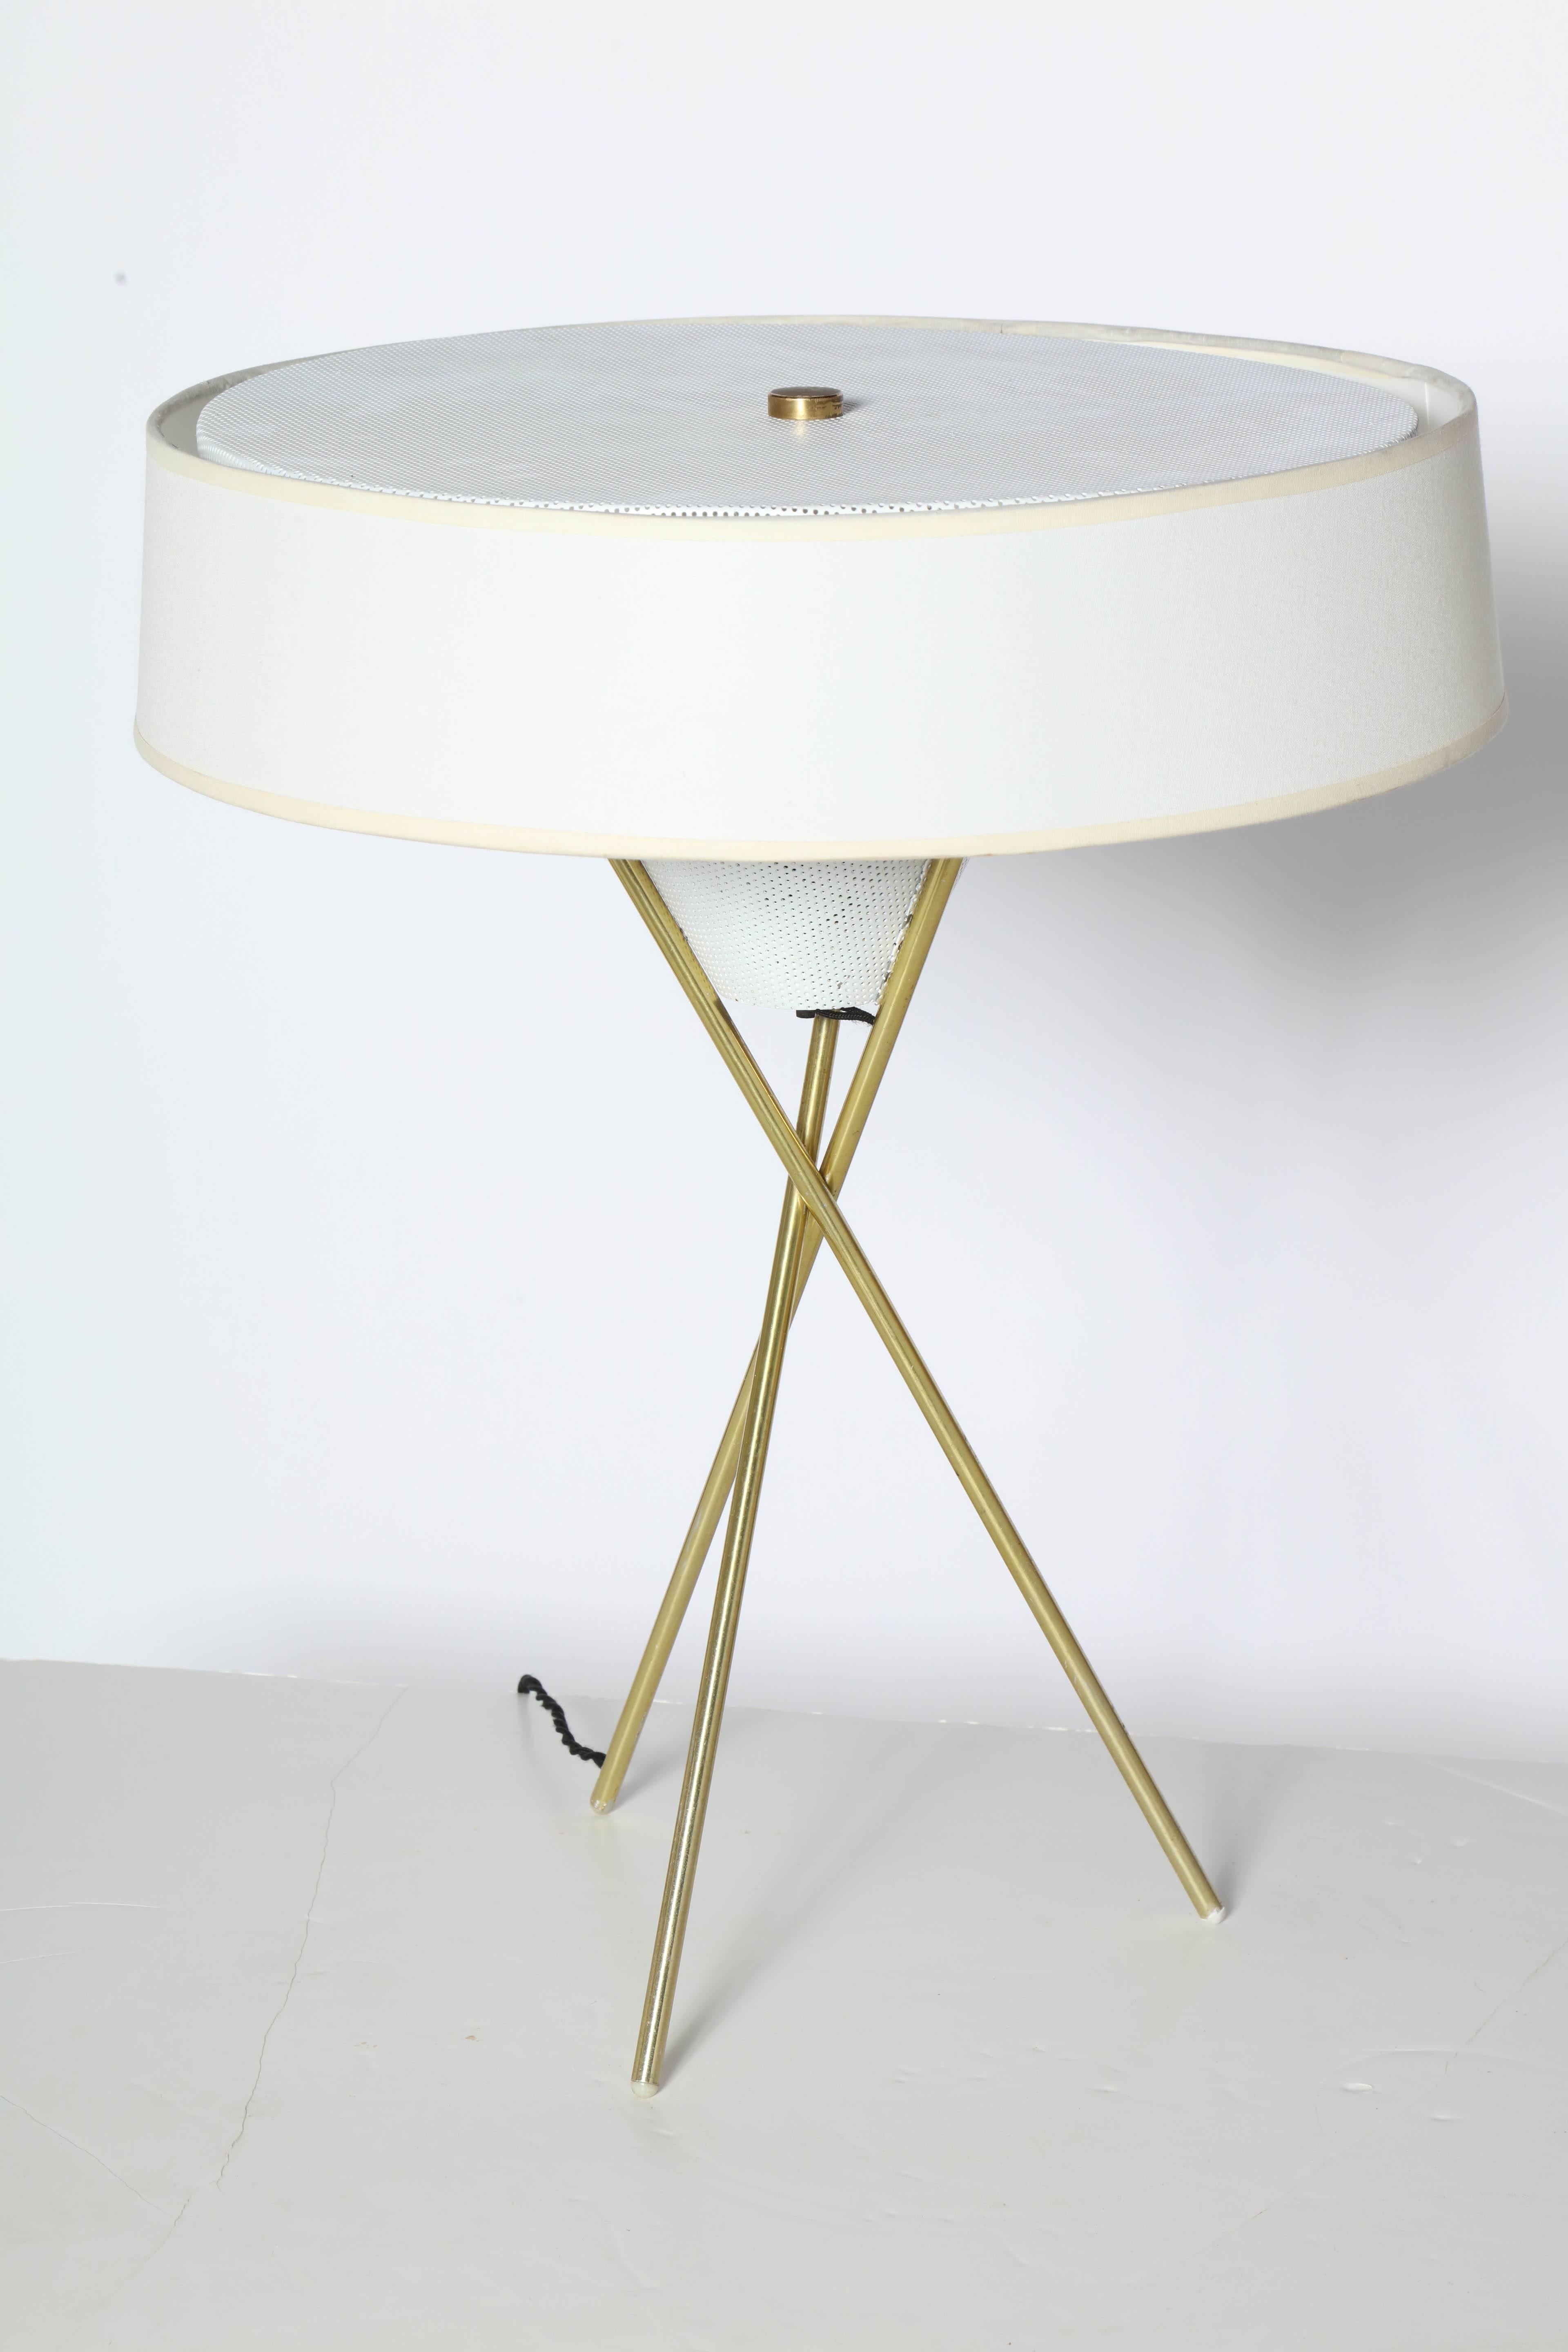 1950s Gerald Thurston for Lightolier Brass Tripod Desk Lamp. Featuring Brass legs, newWhite linen shade (17D x 4.25H) perforated White enameled metal top diffuser and lower cone diffuser. Classic. Versatile. Living. Desk. Sofa. Rewired with Black